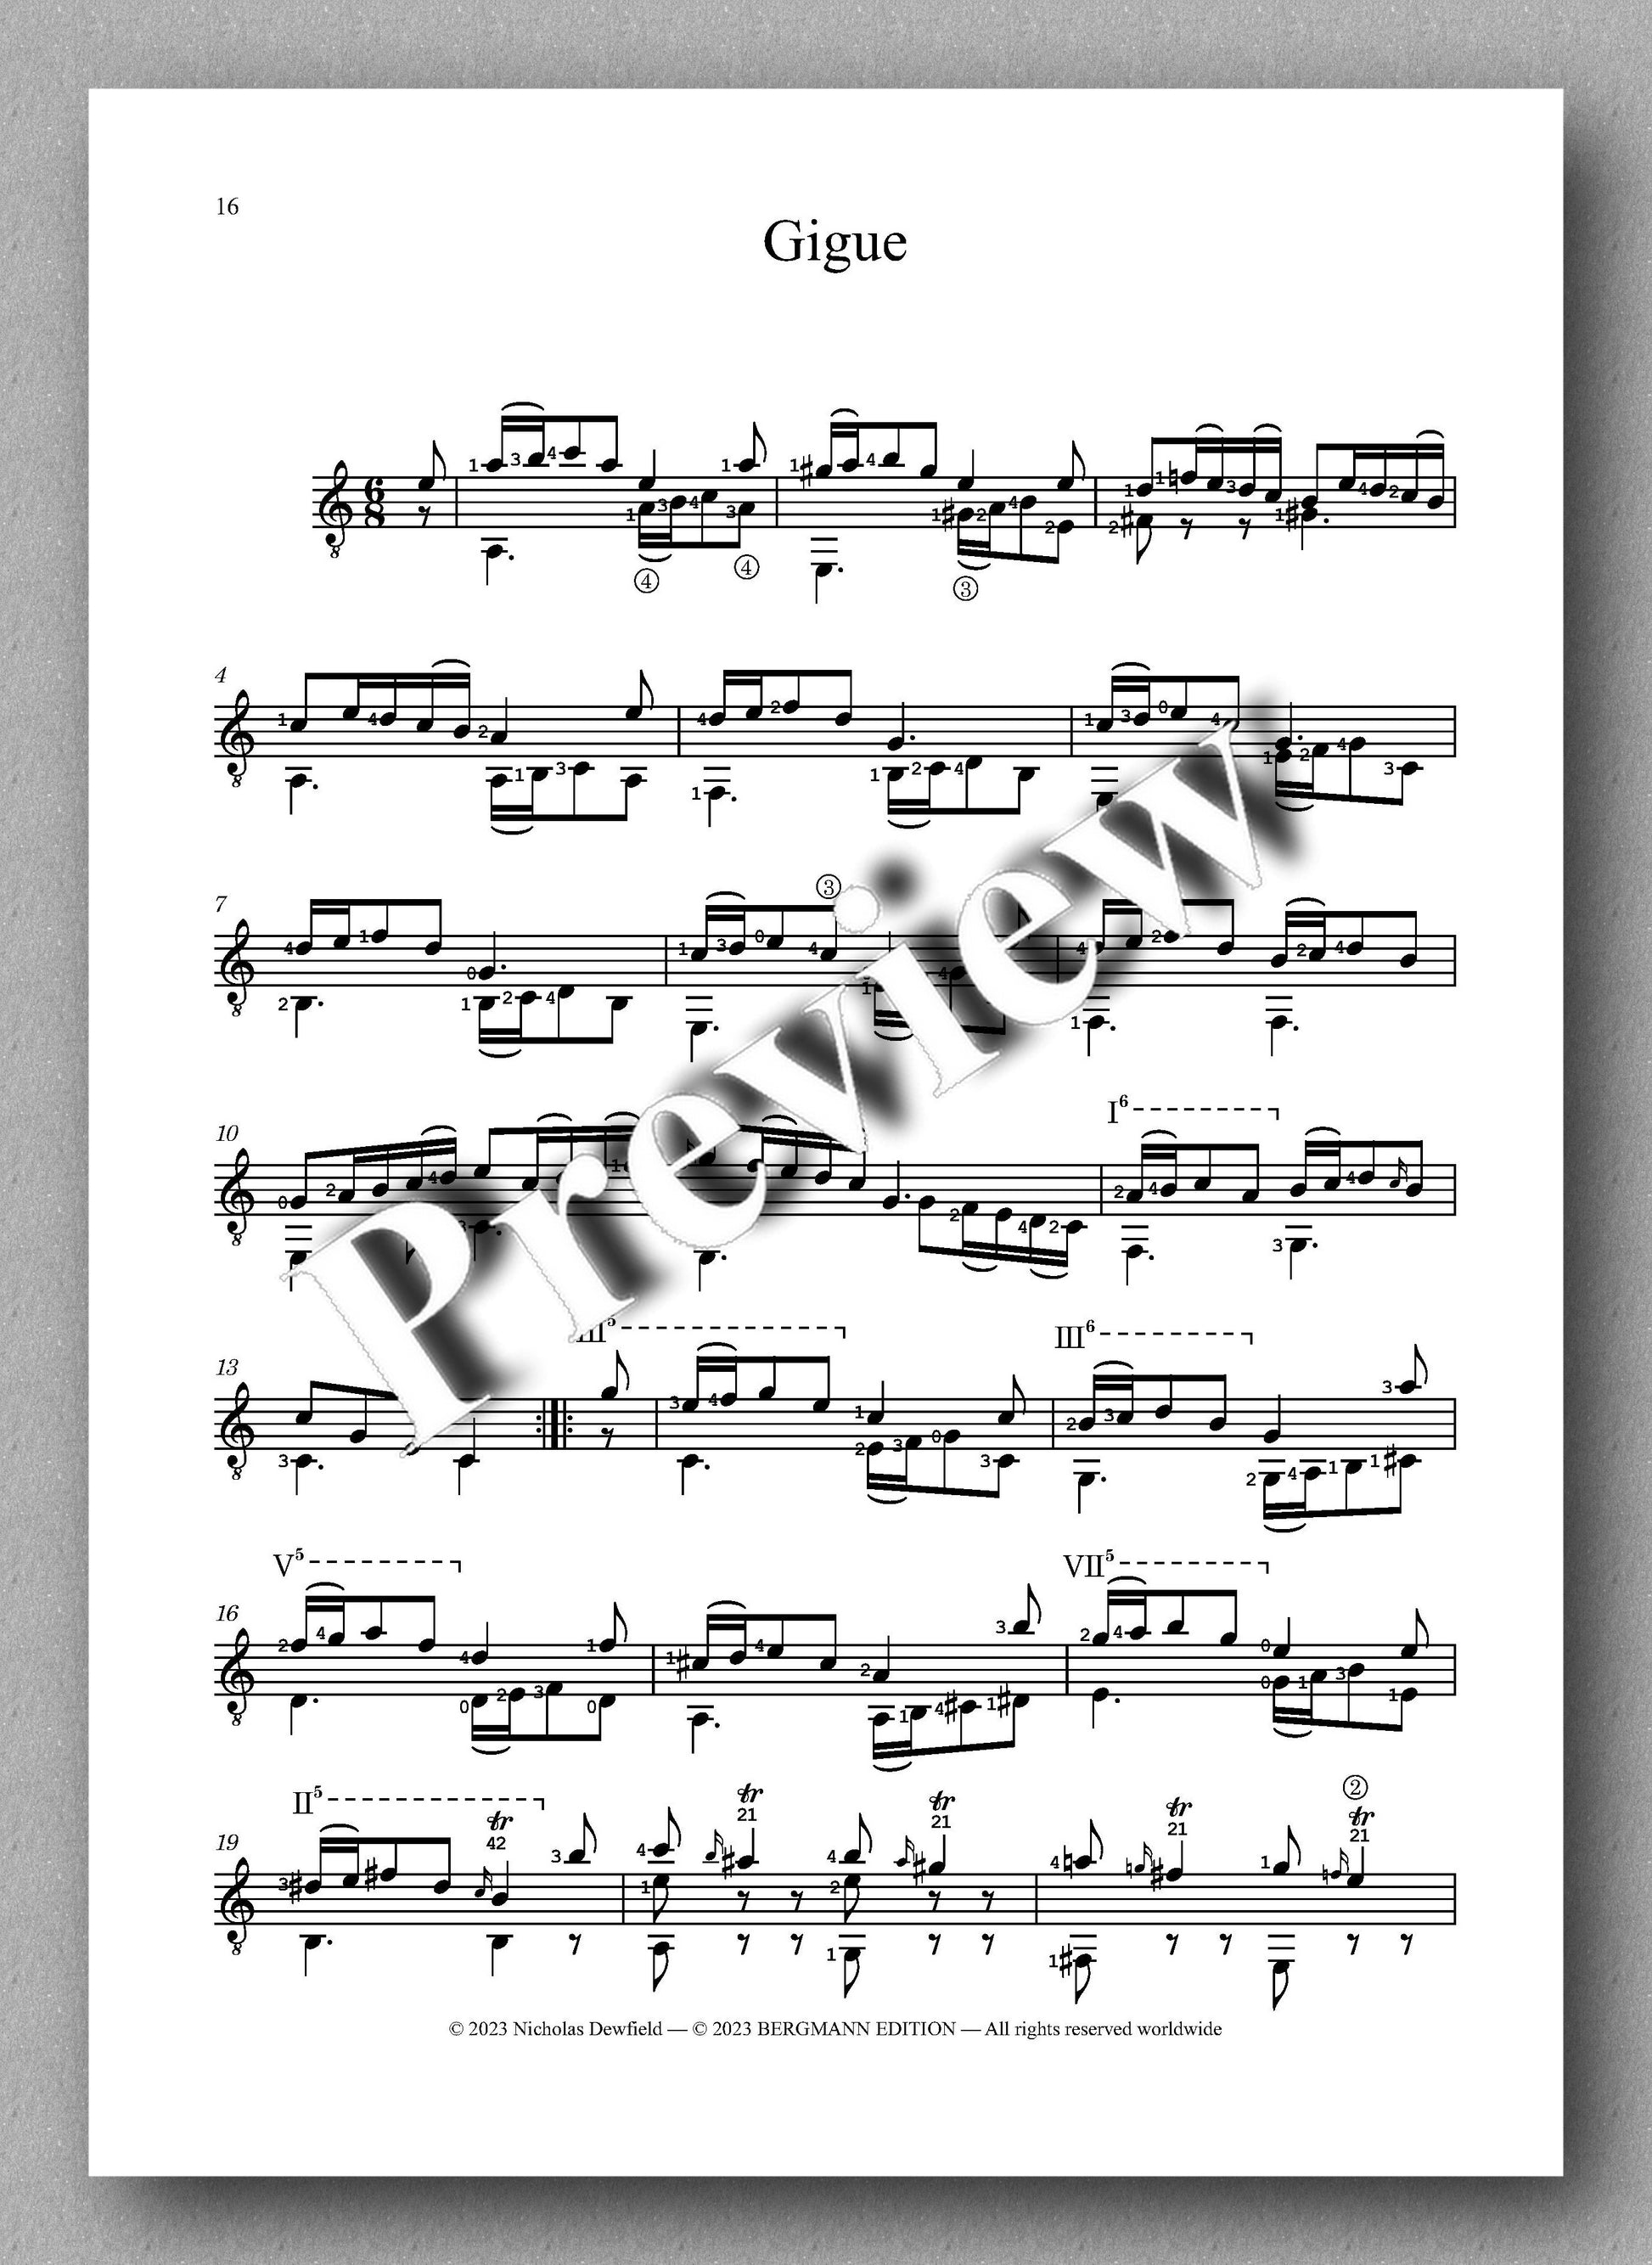 Sylvius Leopold Weiss (1687-1750), Sonata No. 25 - preview of the music score 6